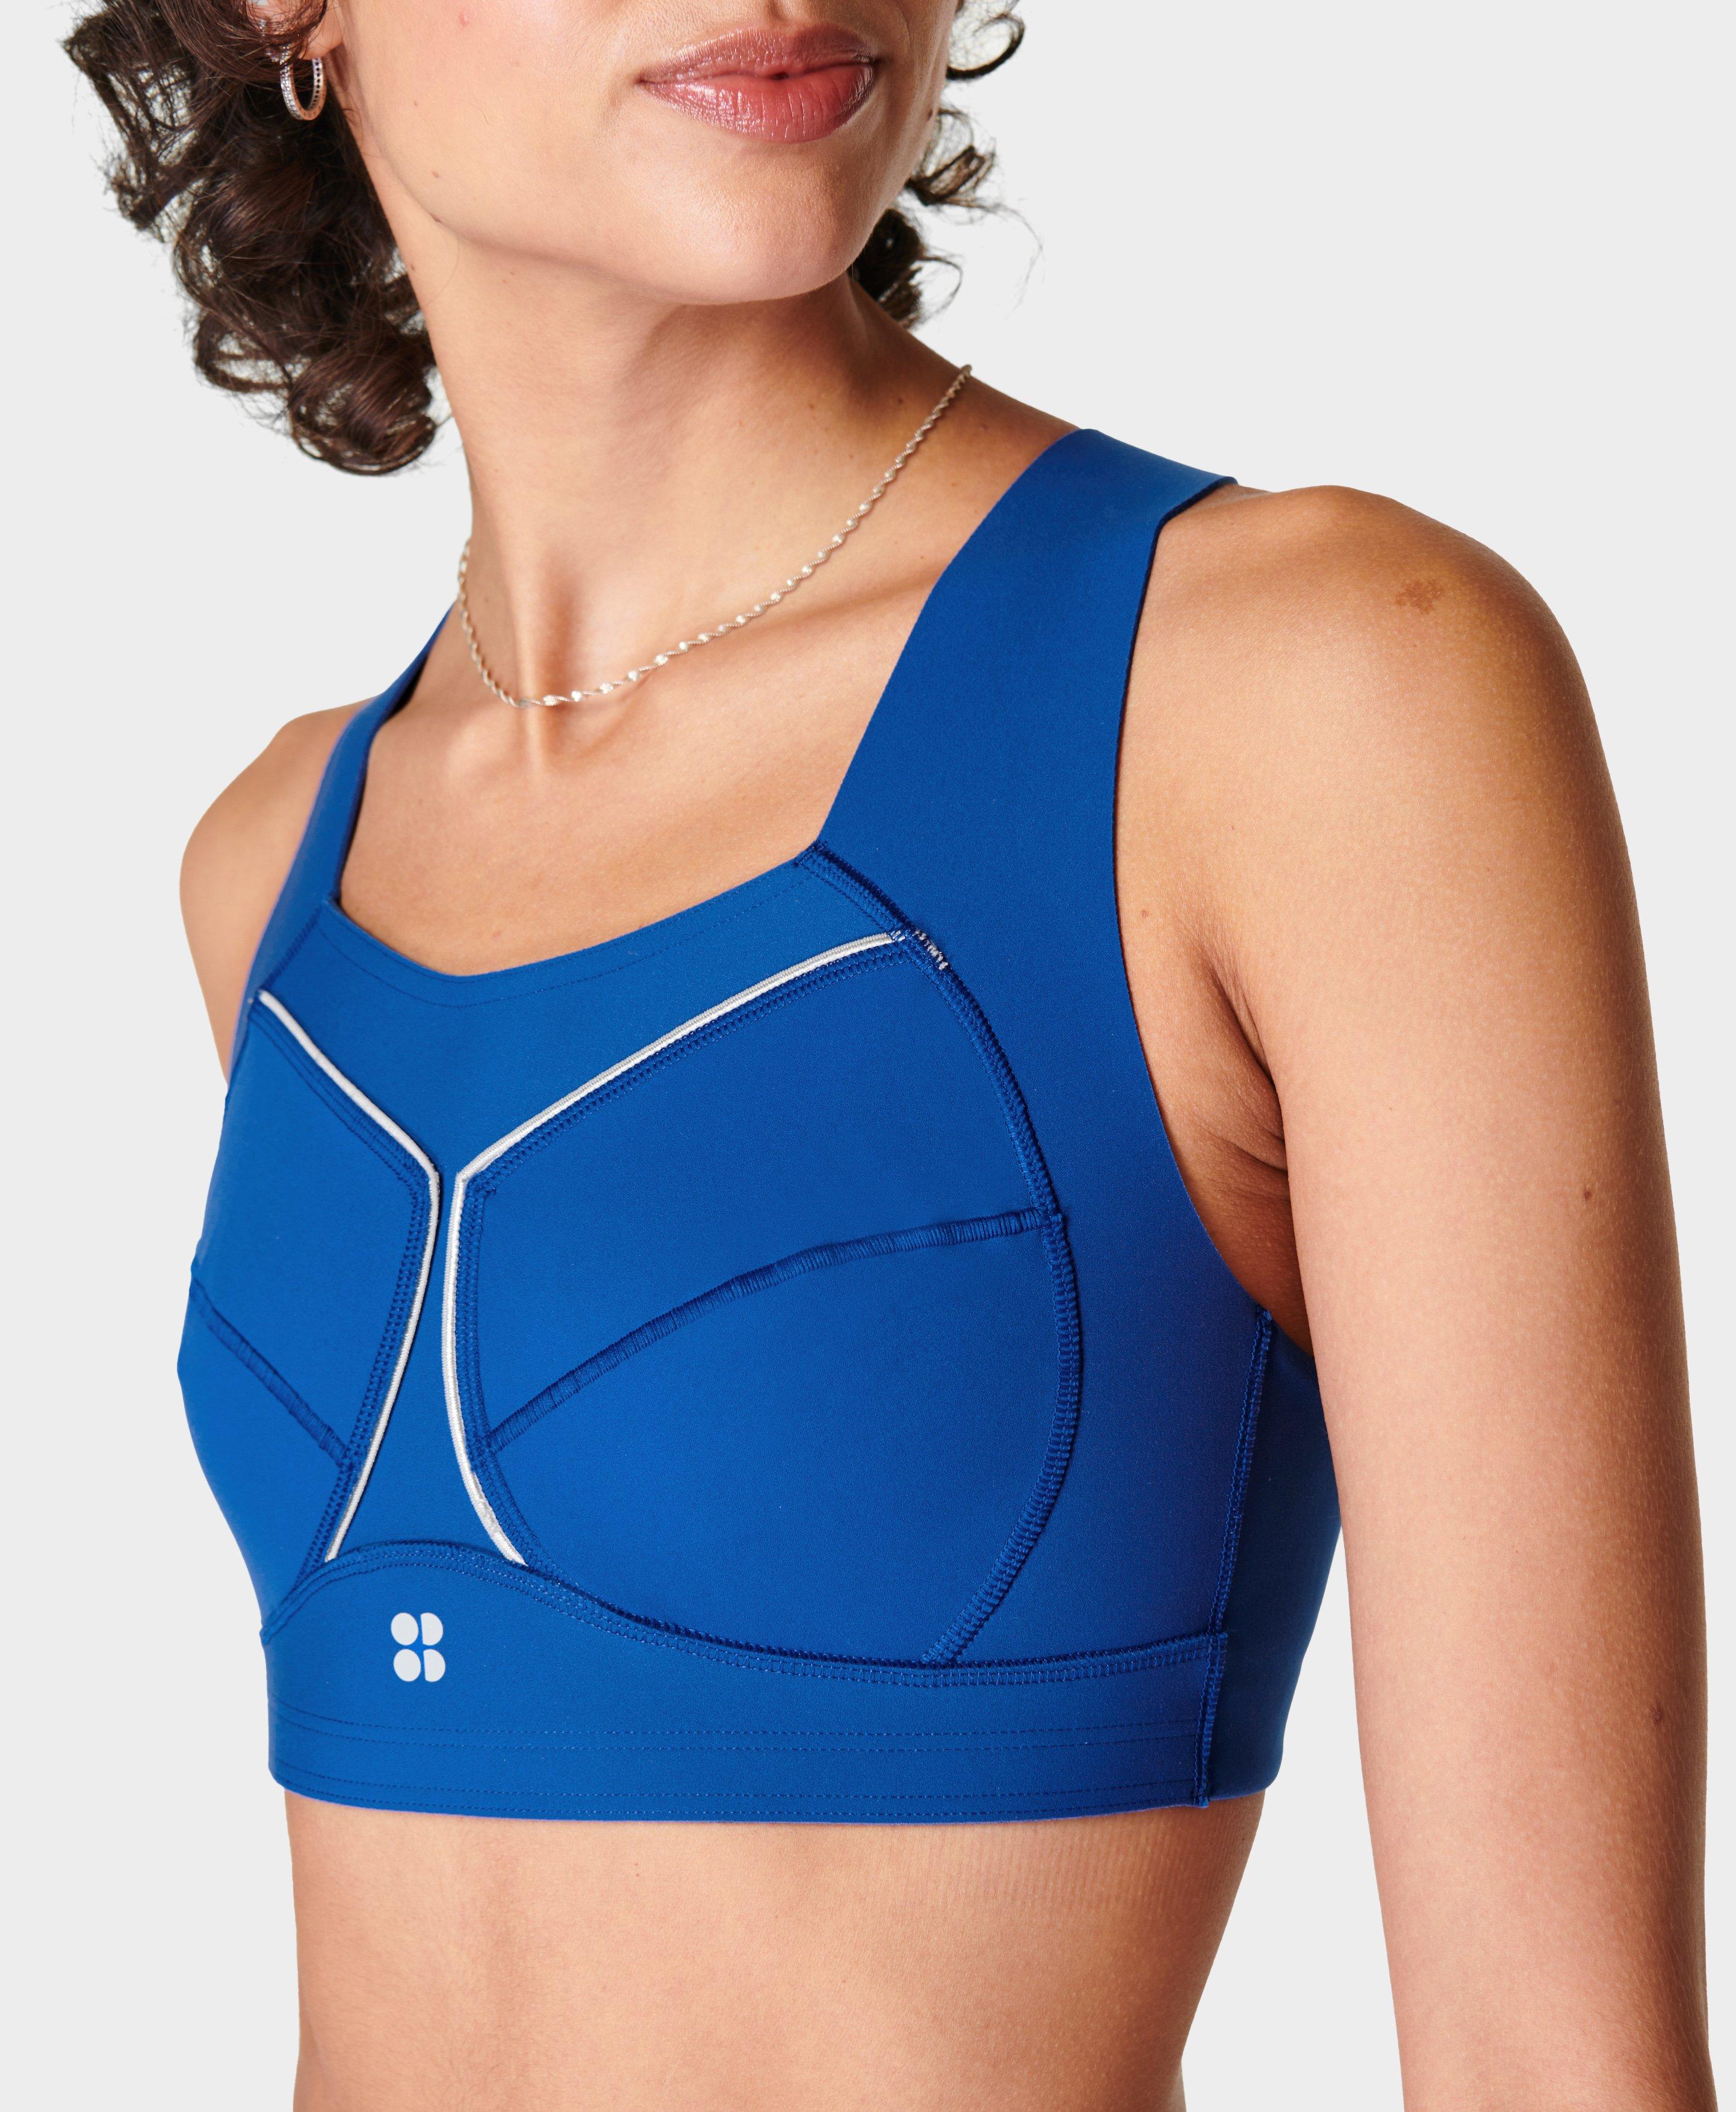 Free People On the Radar Sports Bra in Cotton Candy – Blue Linen